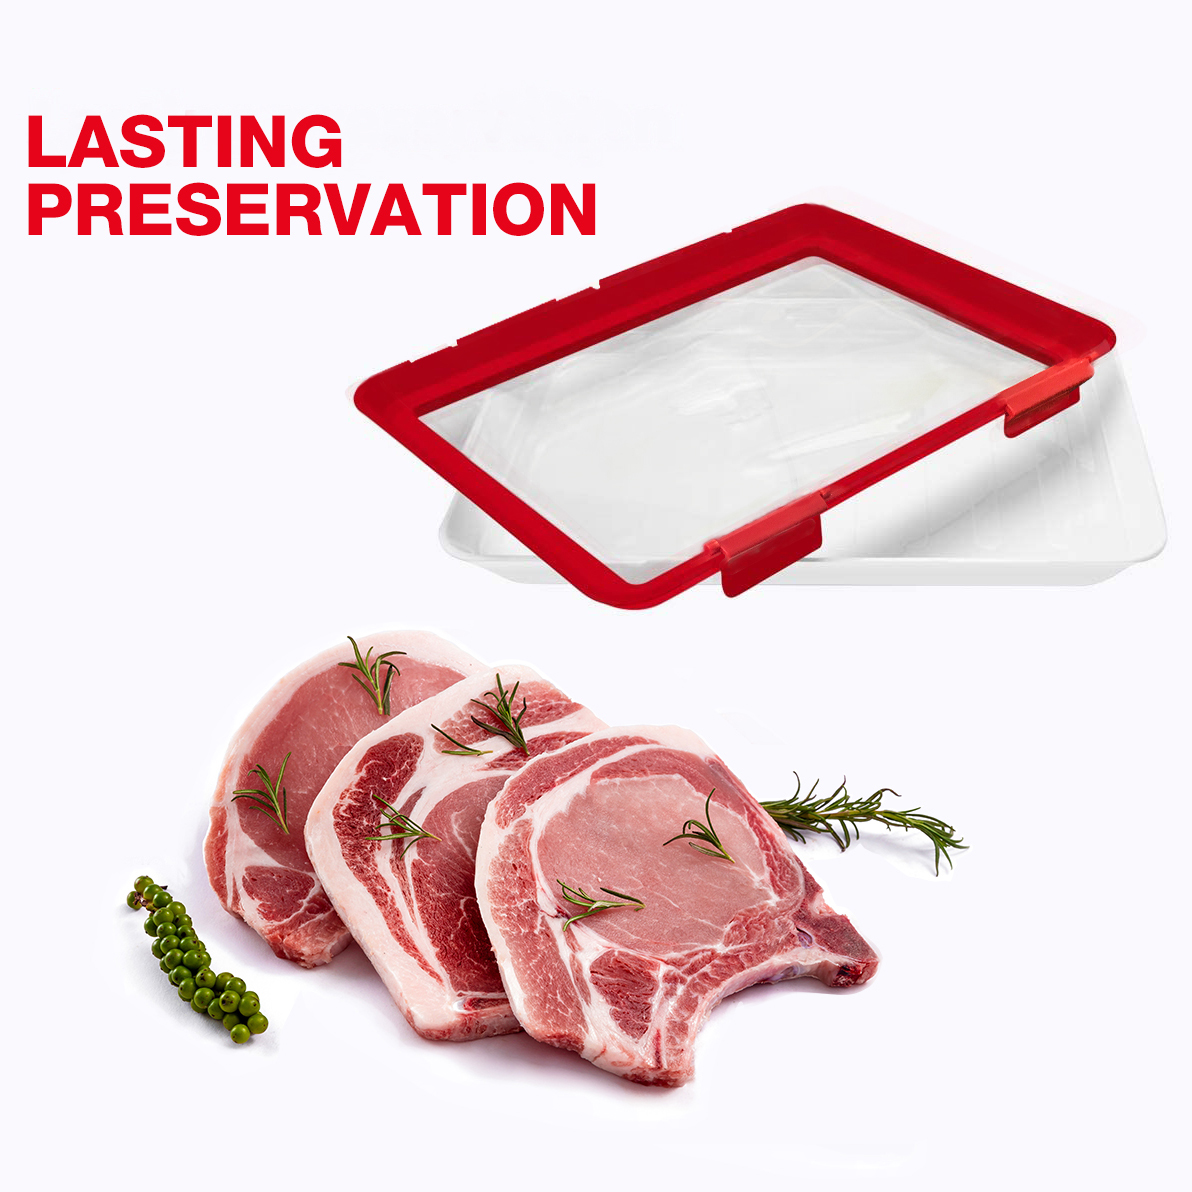 7PCS Clever Tray Creative Food Preservation Tray Plastic Kitchen Food Storage Tray Food Fresh Organizer Reusable Serving Trays